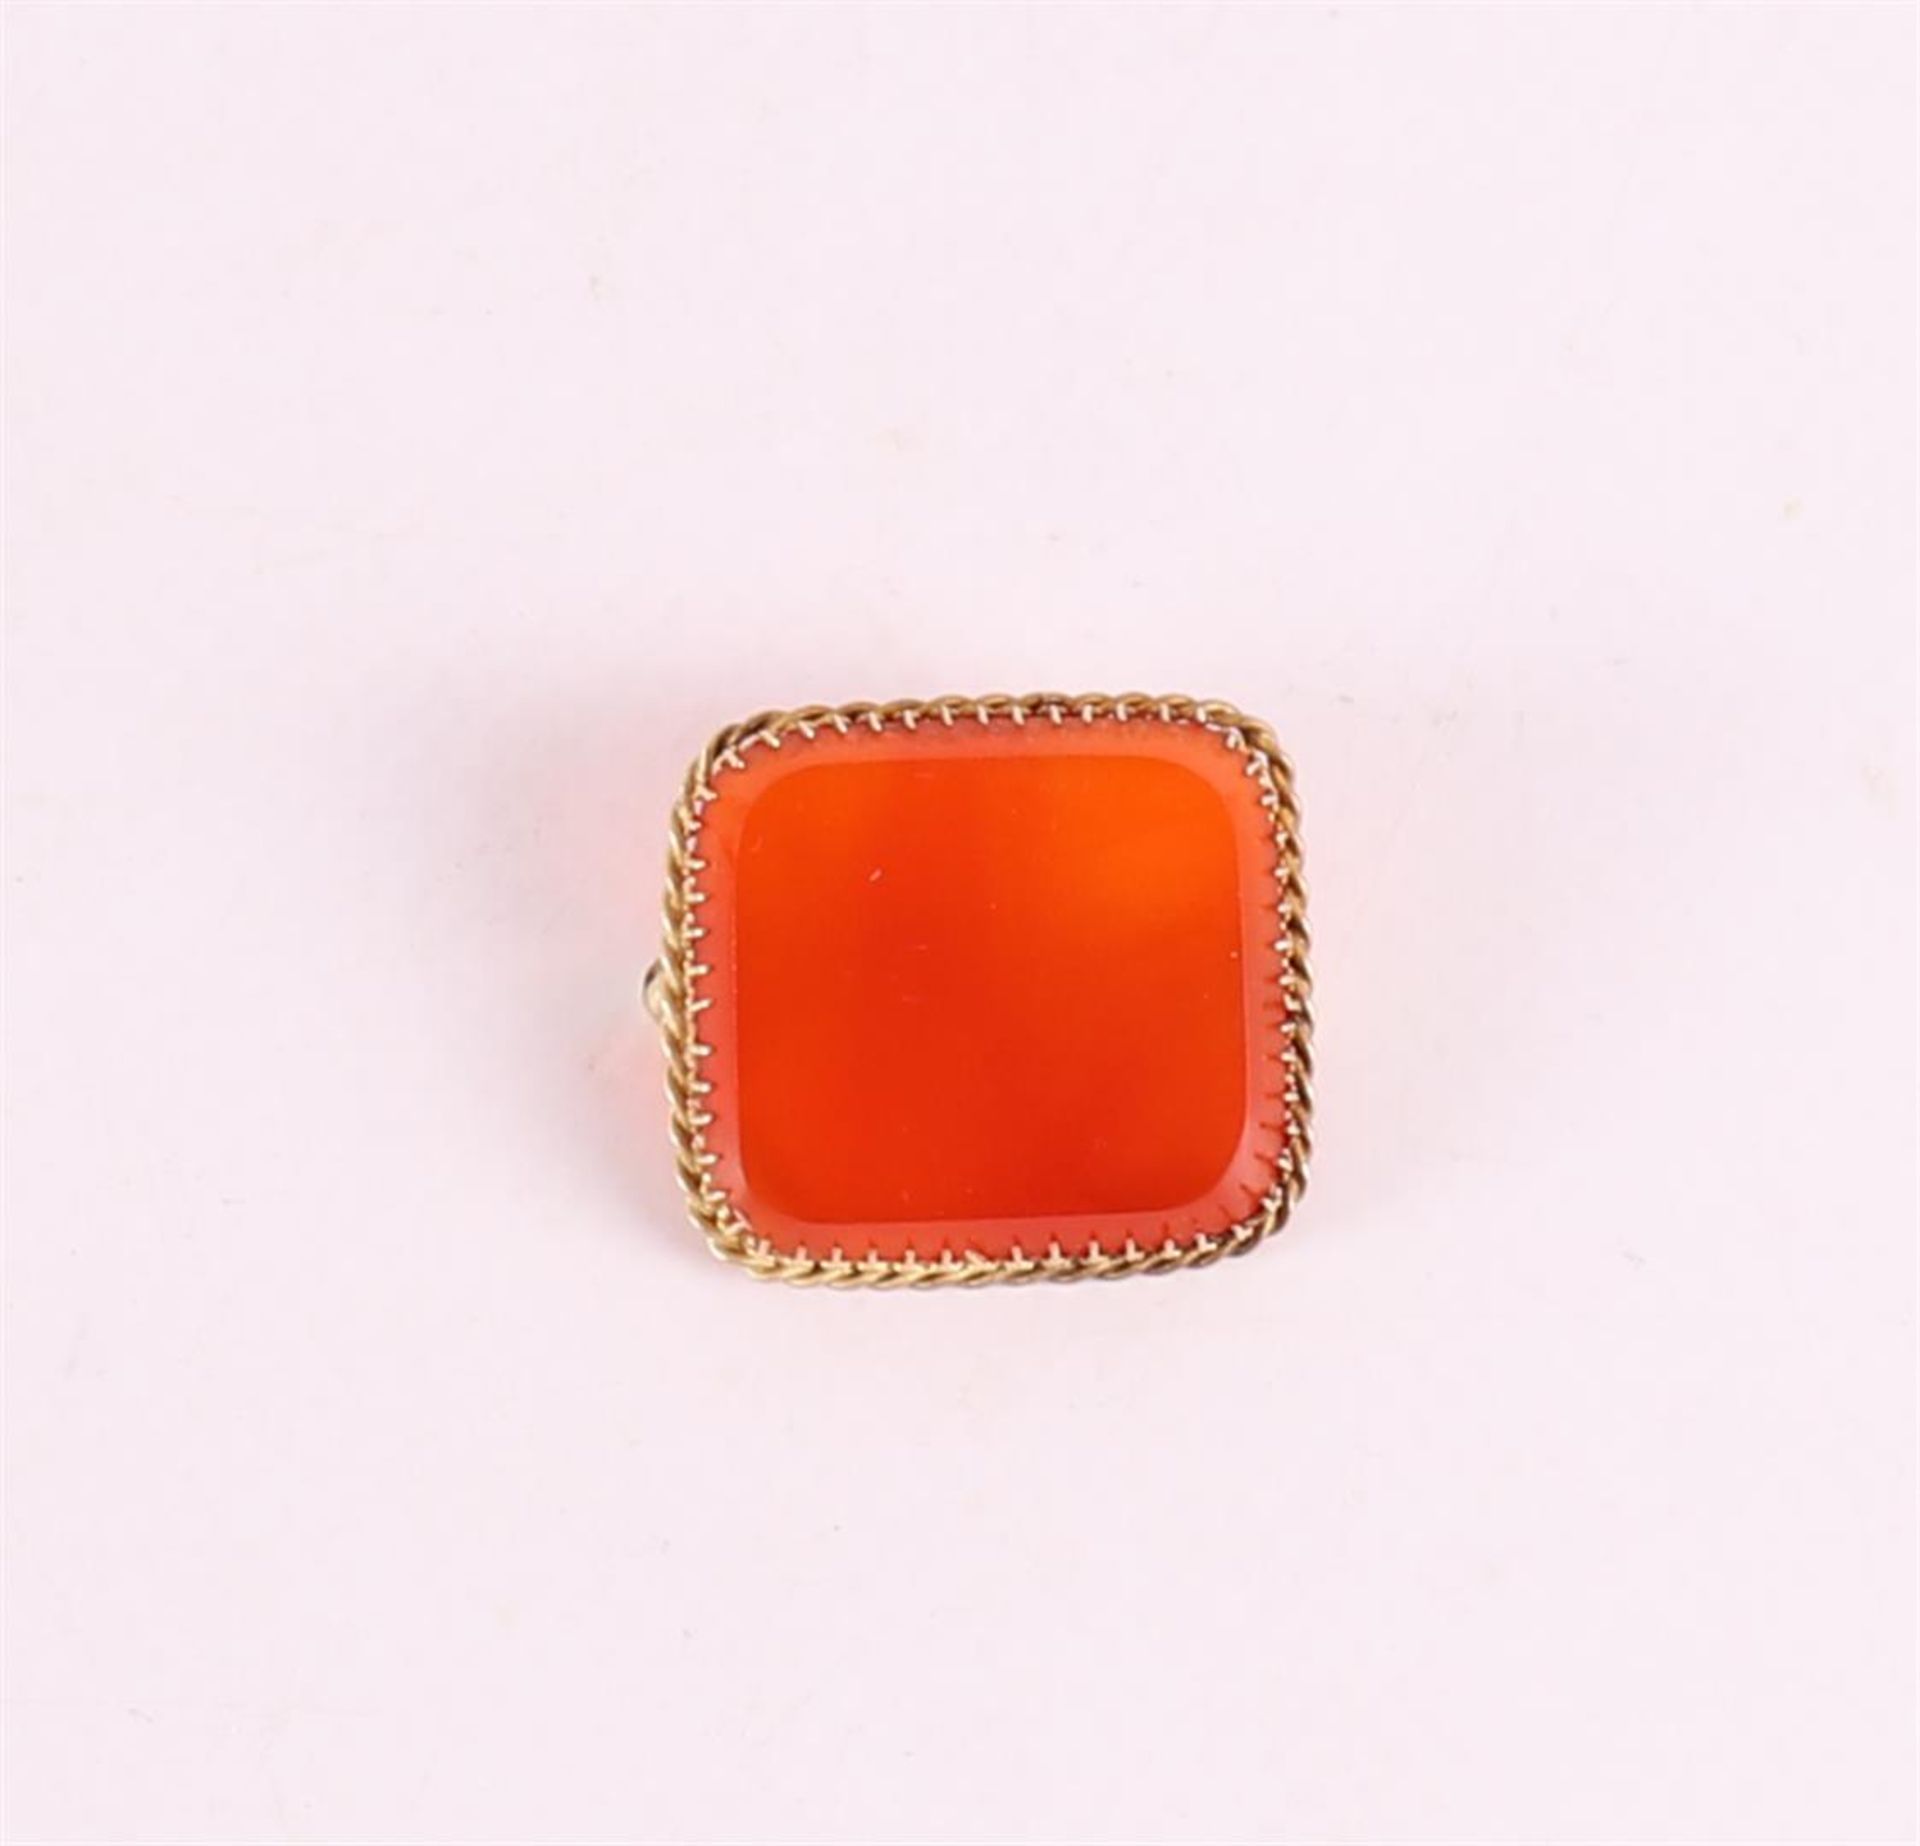 A 14 kt 585/1000 gold brooch with carnelian, 19th century.